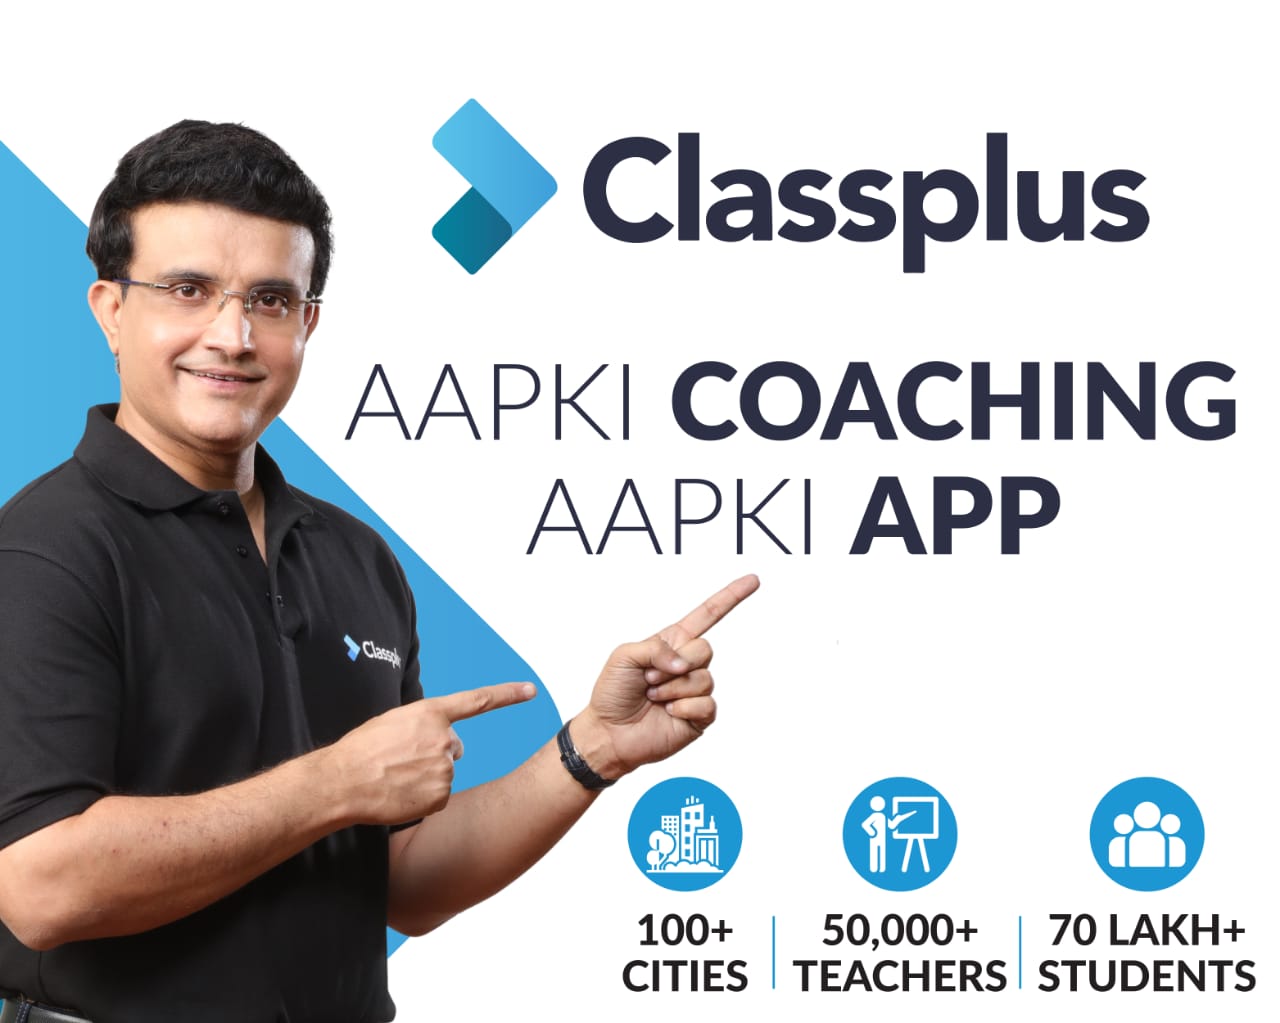 Classplus Teams Up with Celebrated Former Skipper of The Indian Cricket team, Sourav Ganguly, as its new Brand Ambassador